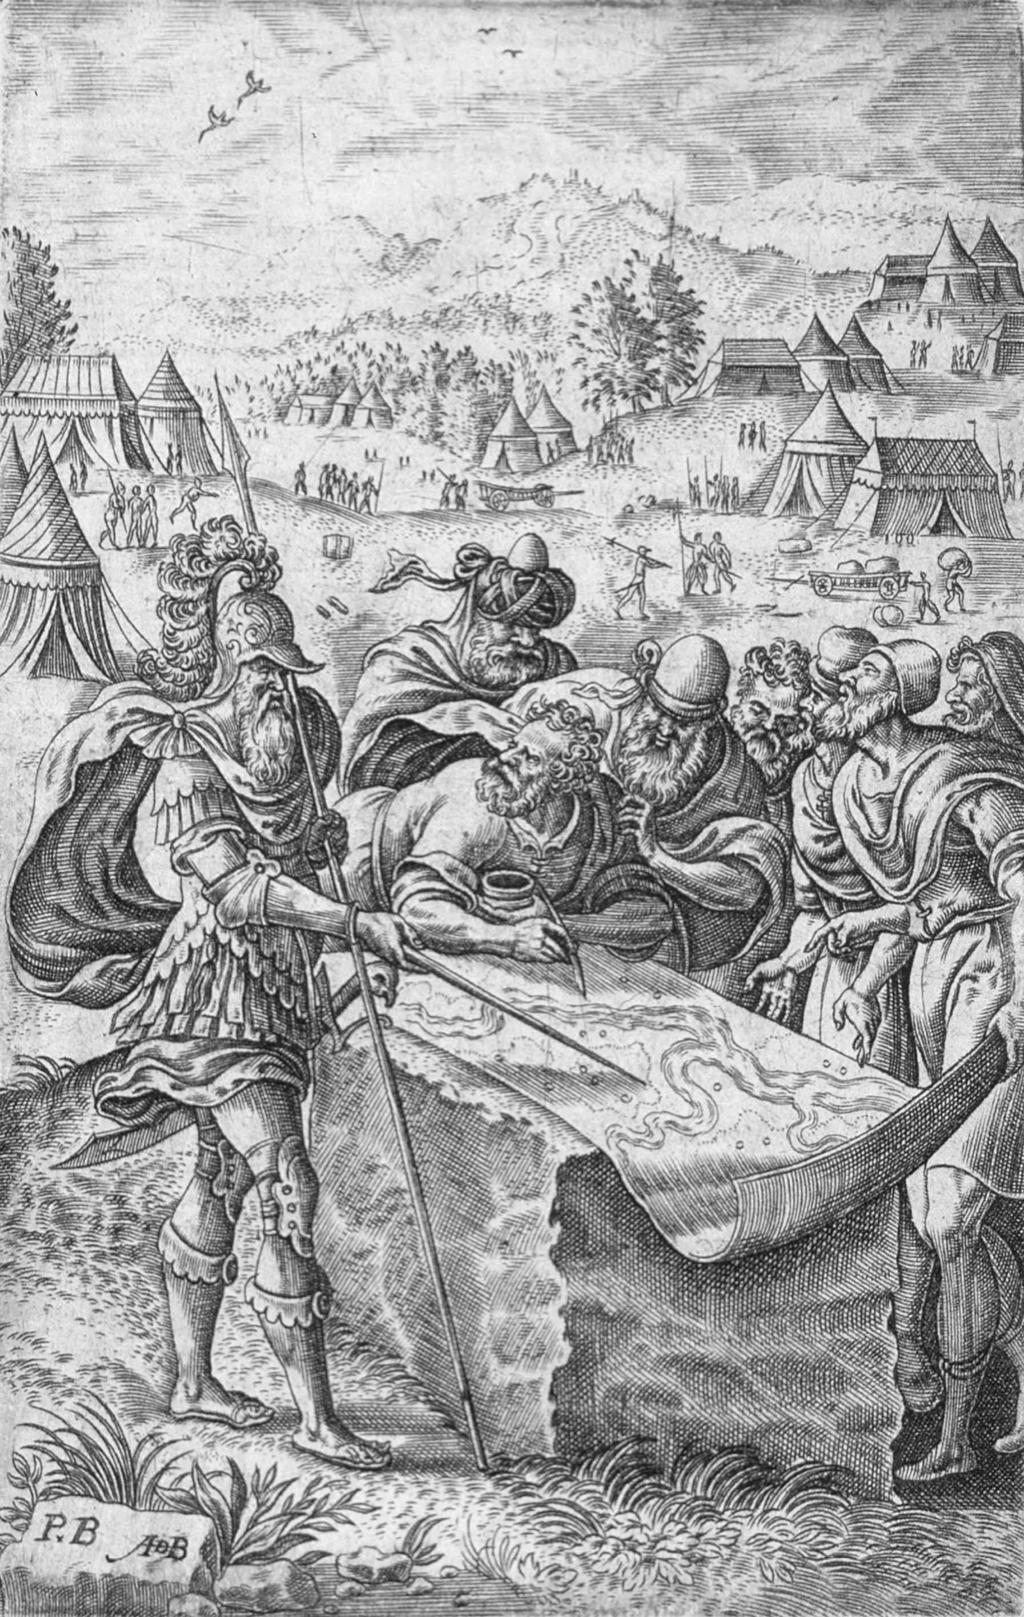 Fig. 9. Joshua and his generals poring over a map of the Promised Land. The image is taken from a collection of odes by Montano and matching engravings by various artists on biblical themes.